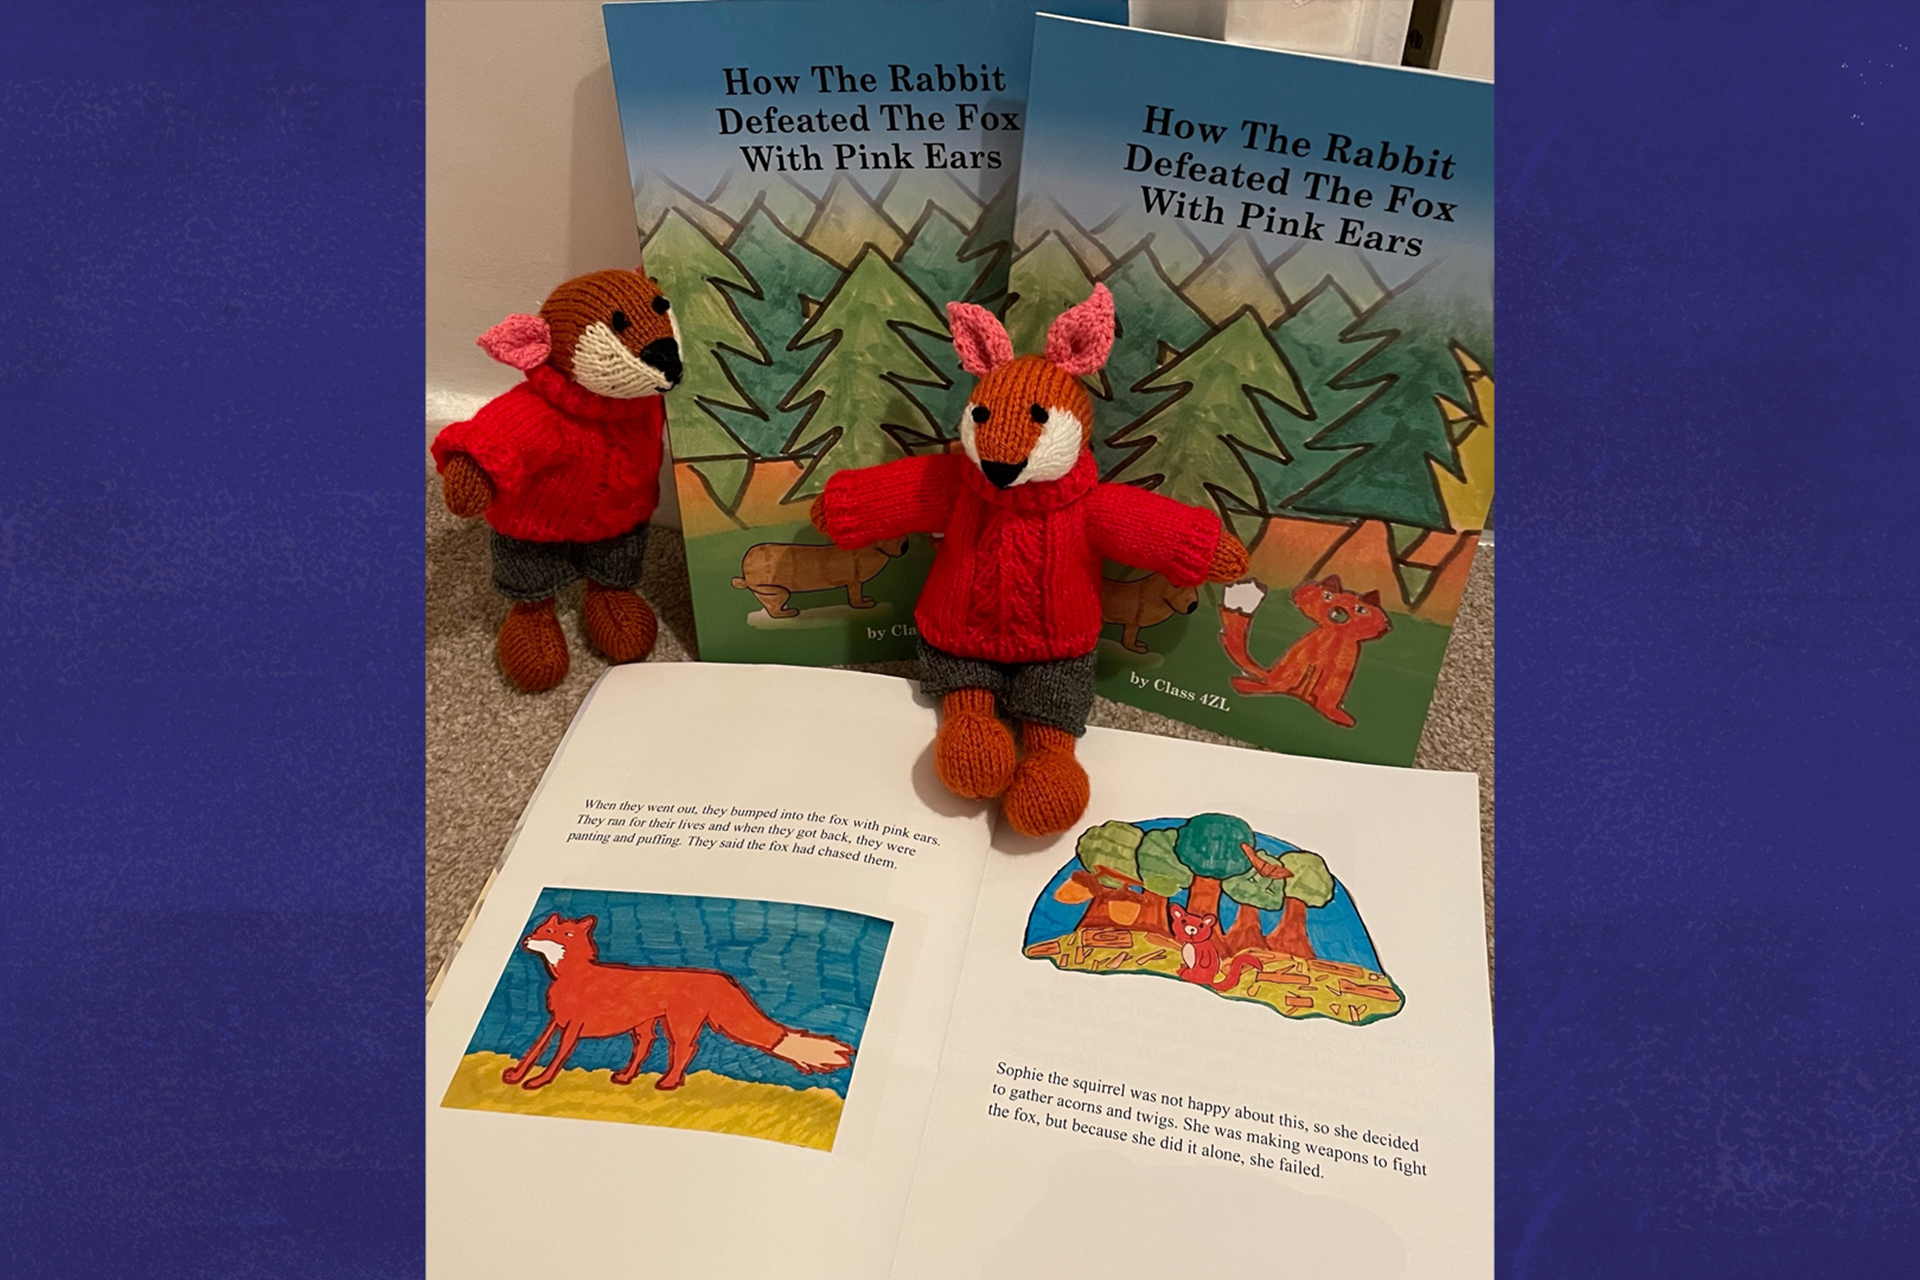 Class 6CJ's book open with two toy foxes in front of it.